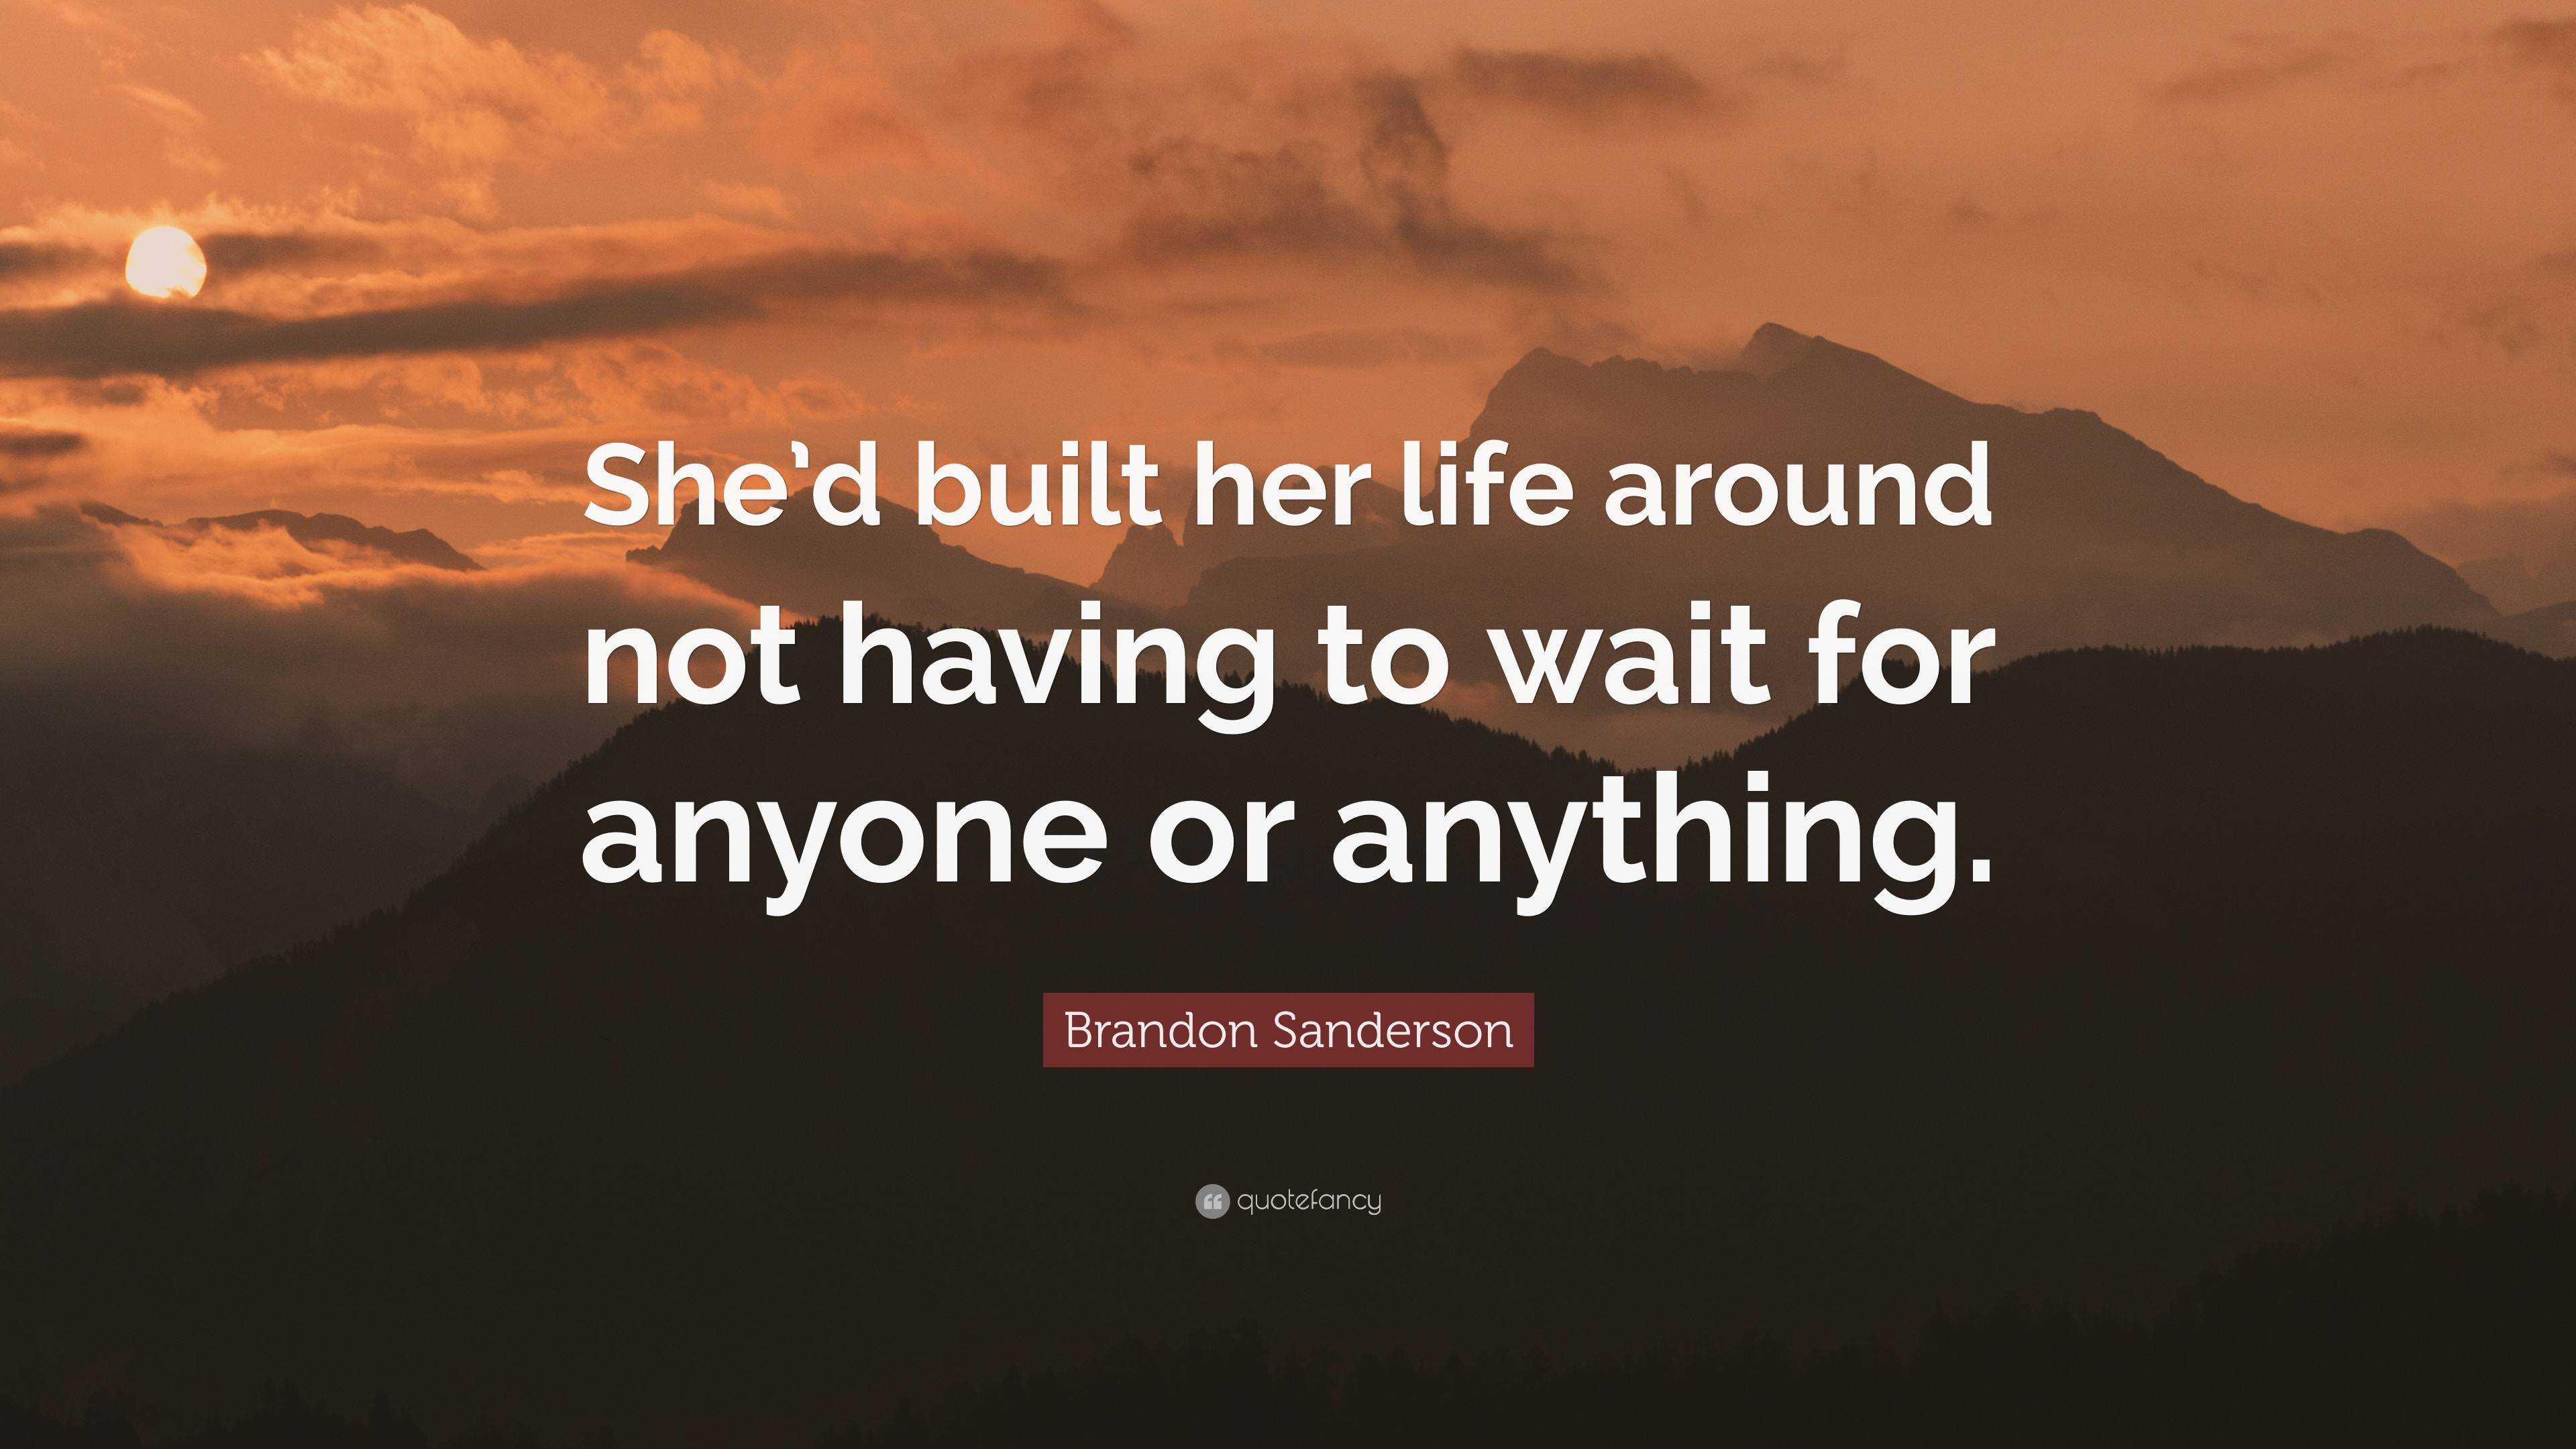 Brandon Sanderson Quote: “She’d built her life around not having to ...